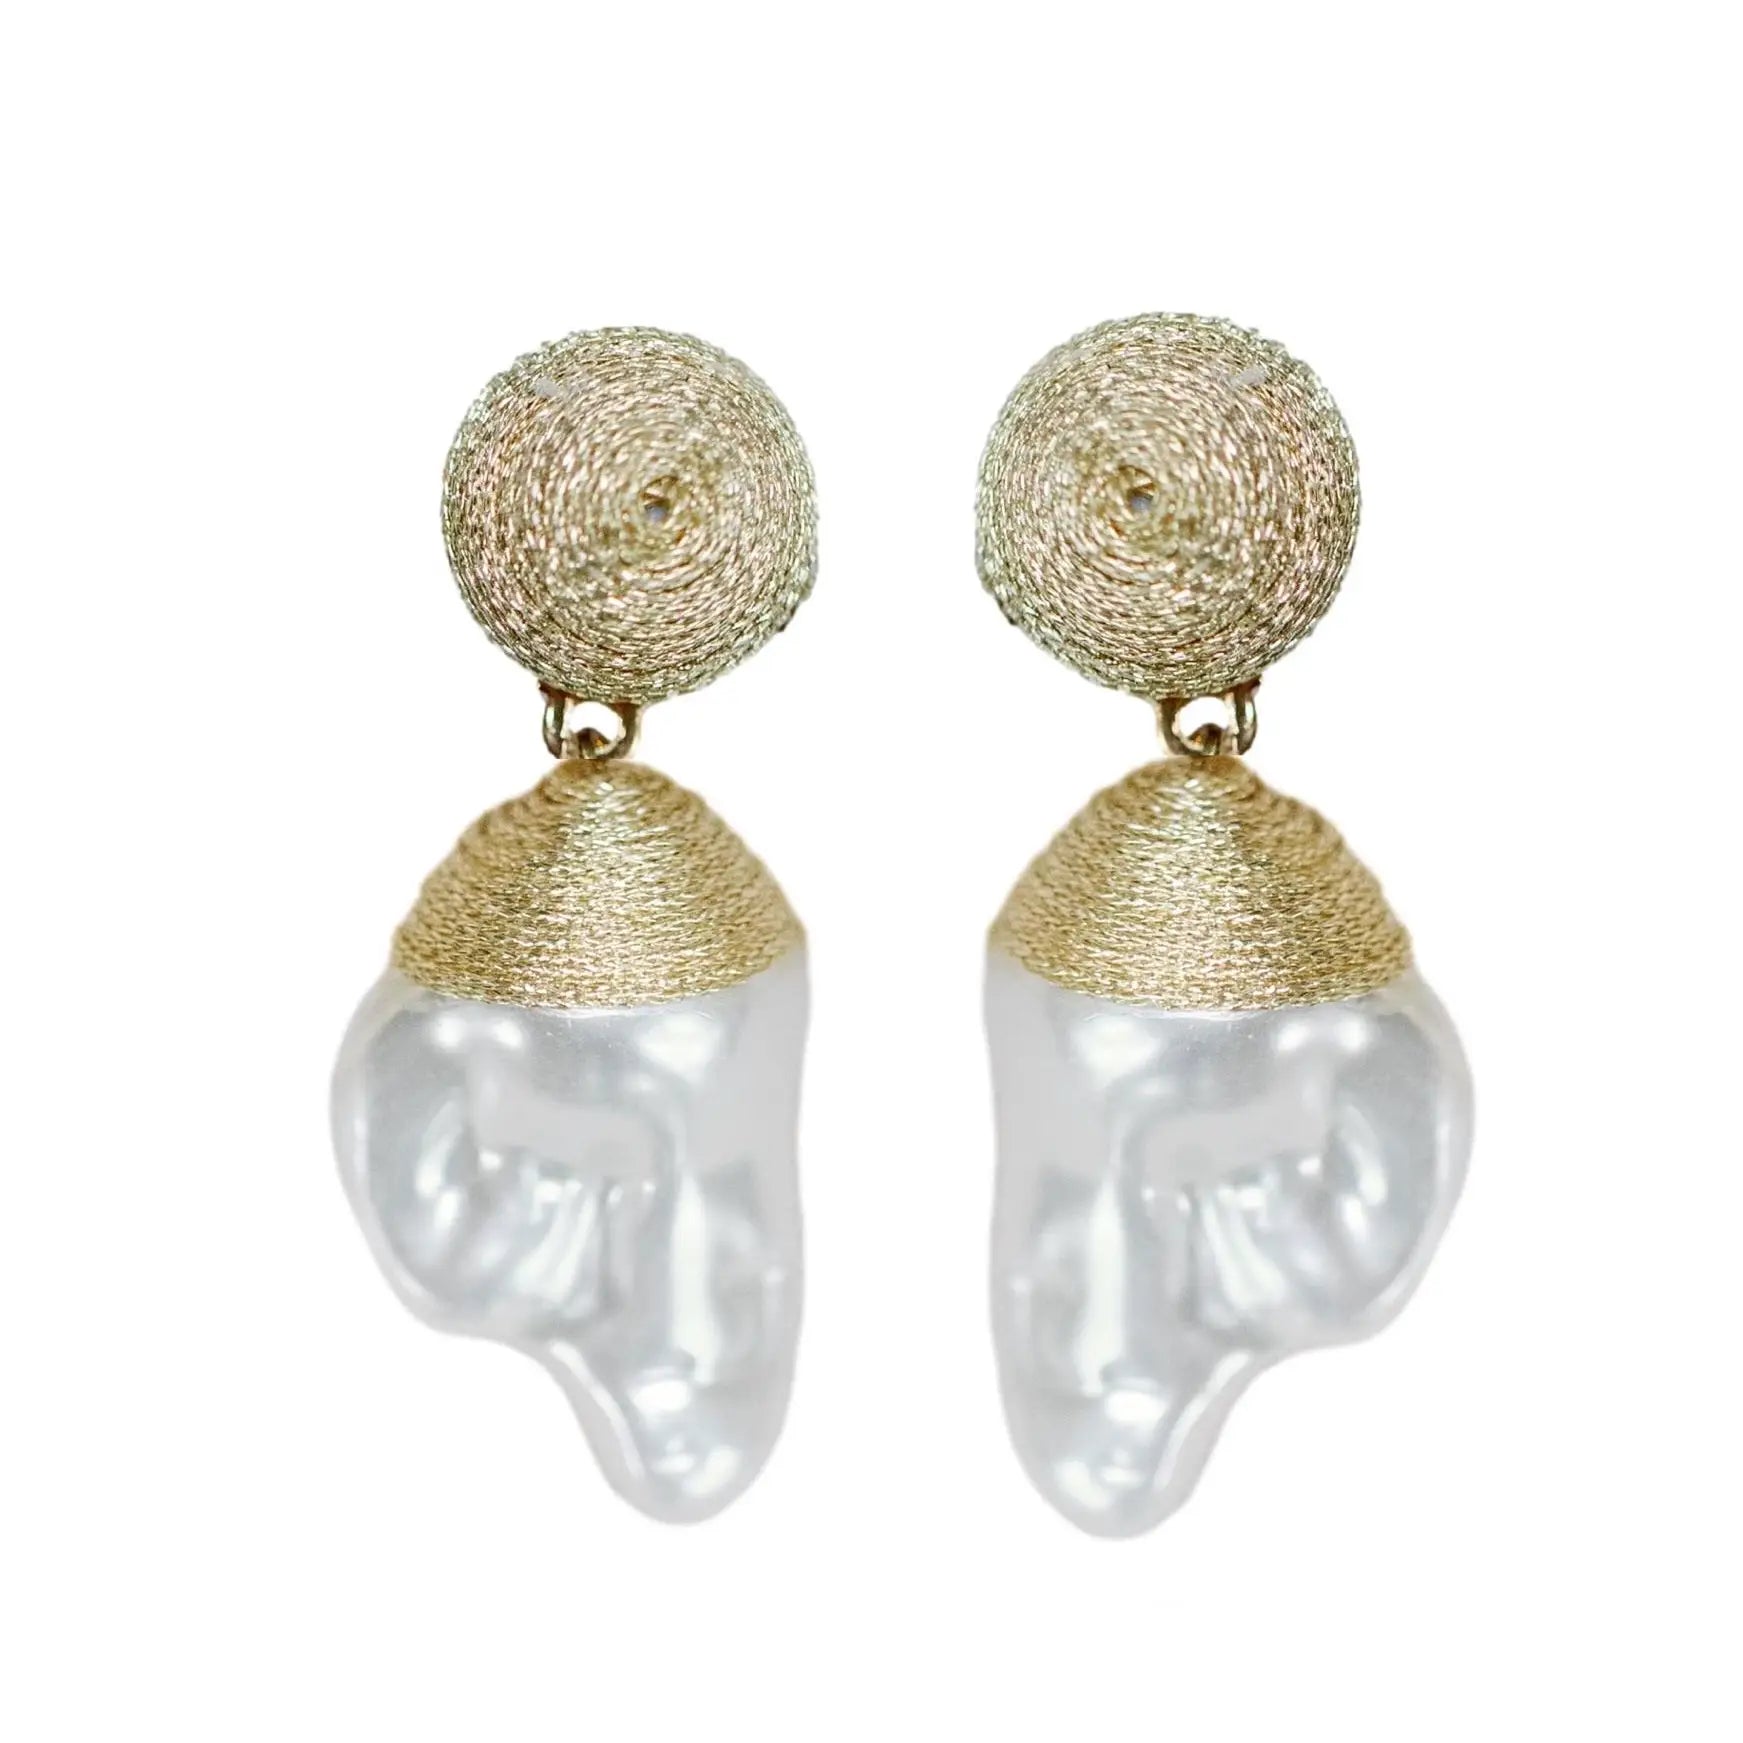 Gold Natural Pearl Statement Drop Earrings-110 Jewelry & Hair-St Armands Designs of Sarasota-July & June Women's Fashion Boutique Located in San Antonio, Texas